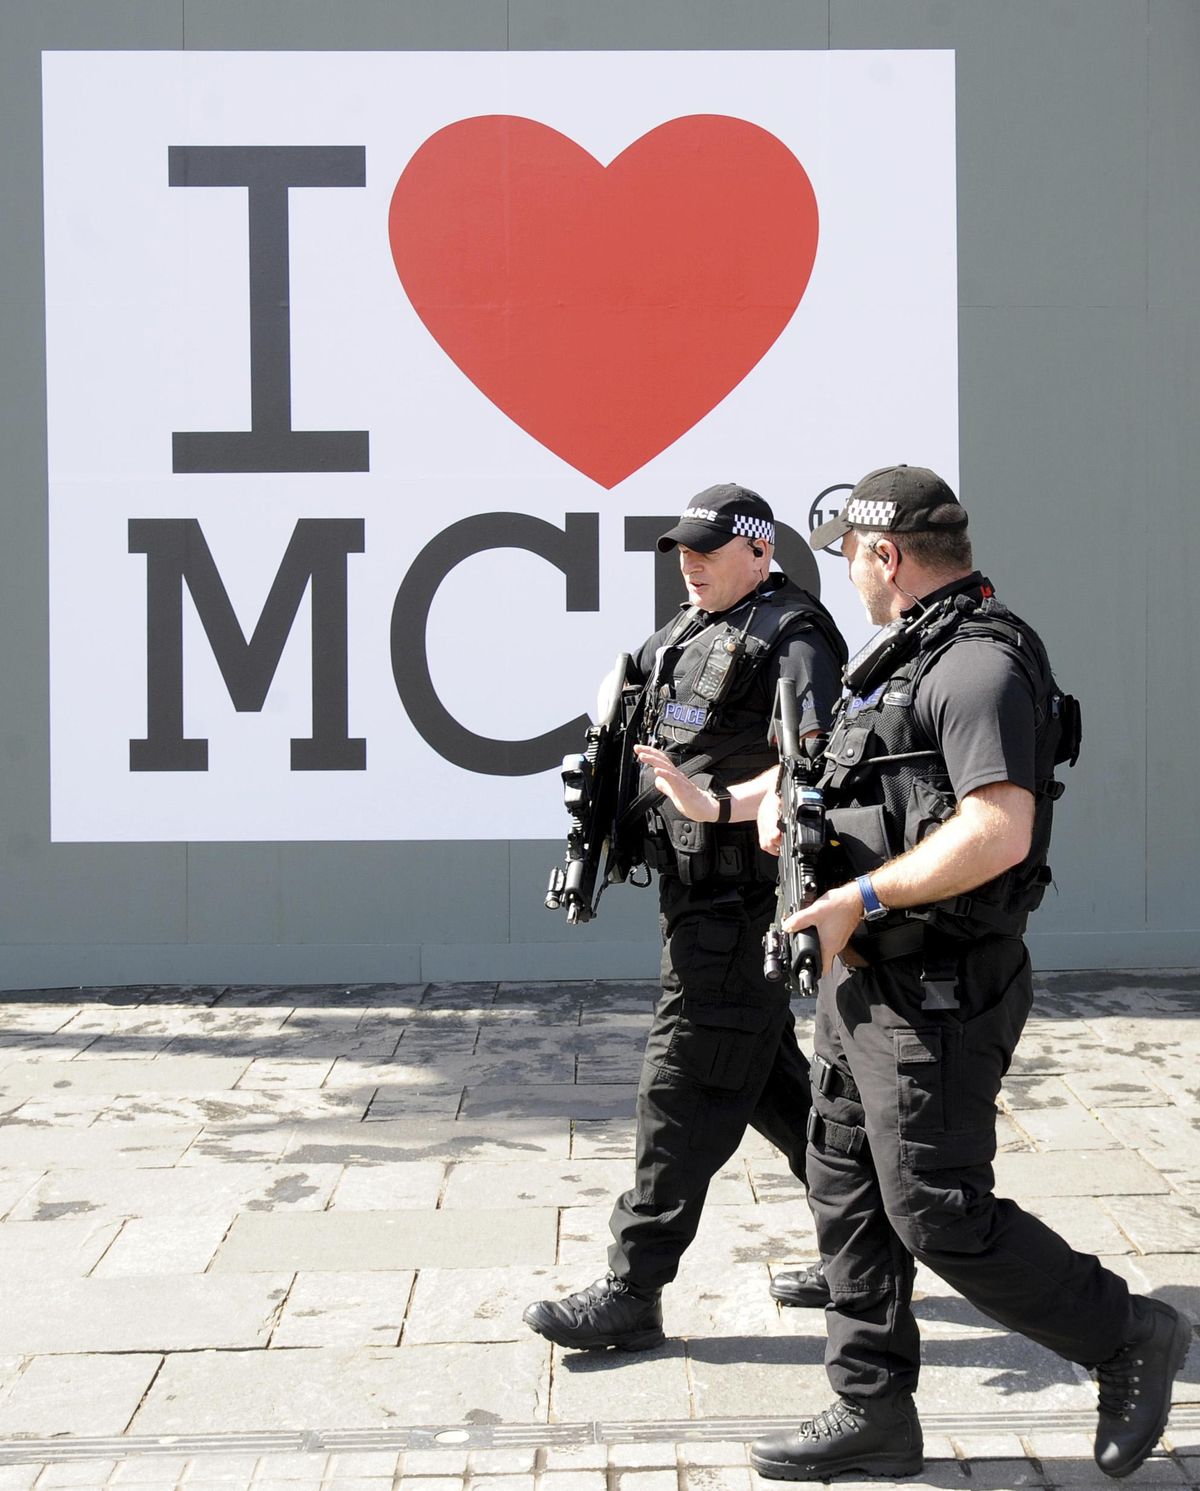 Armed response police patrol the streets in central Manchester, England, Saturday, May 27, 2017. More than 20 people were killed in an explosion following an Ariana Grande concert at the Manchester Arena late Monday evening. (Rui Vieira / Associated Press)